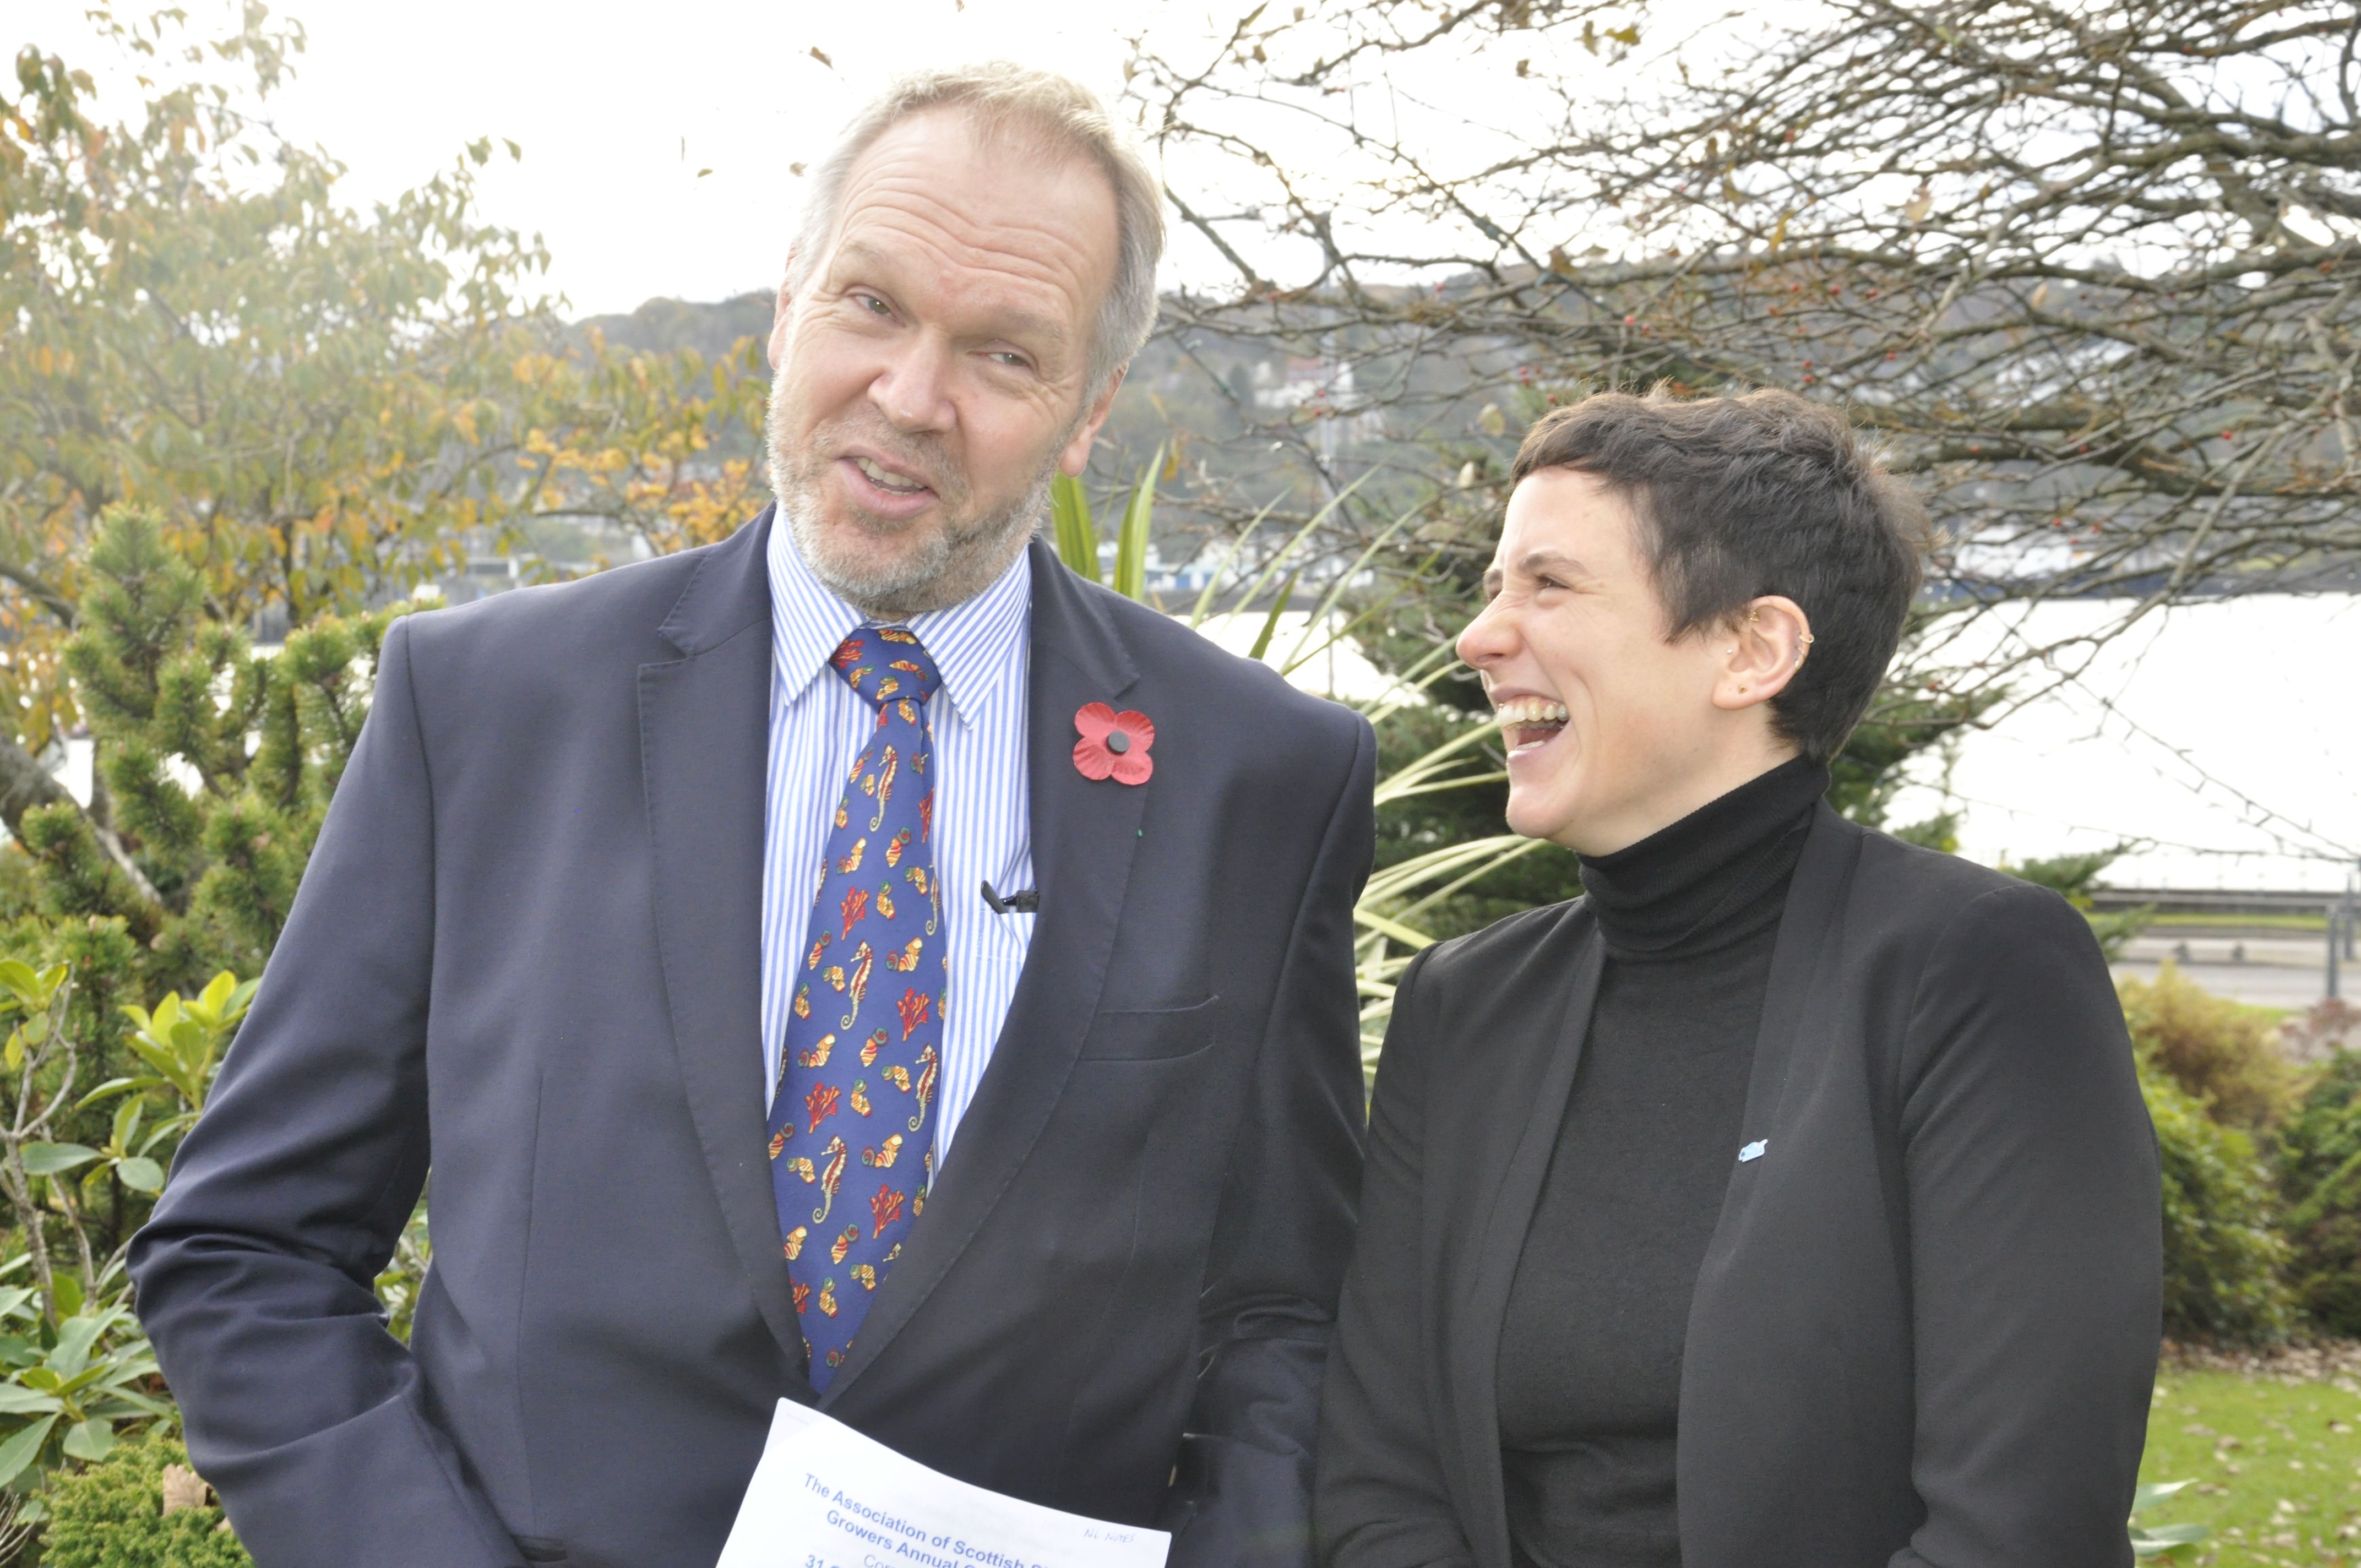 ASSG CEO Nick Lake and Mairi Gougeon, Scotland’s minister for Rural Affairs and the Natural Environment, at the opening of the conference yesterday (photo: David McPhee)